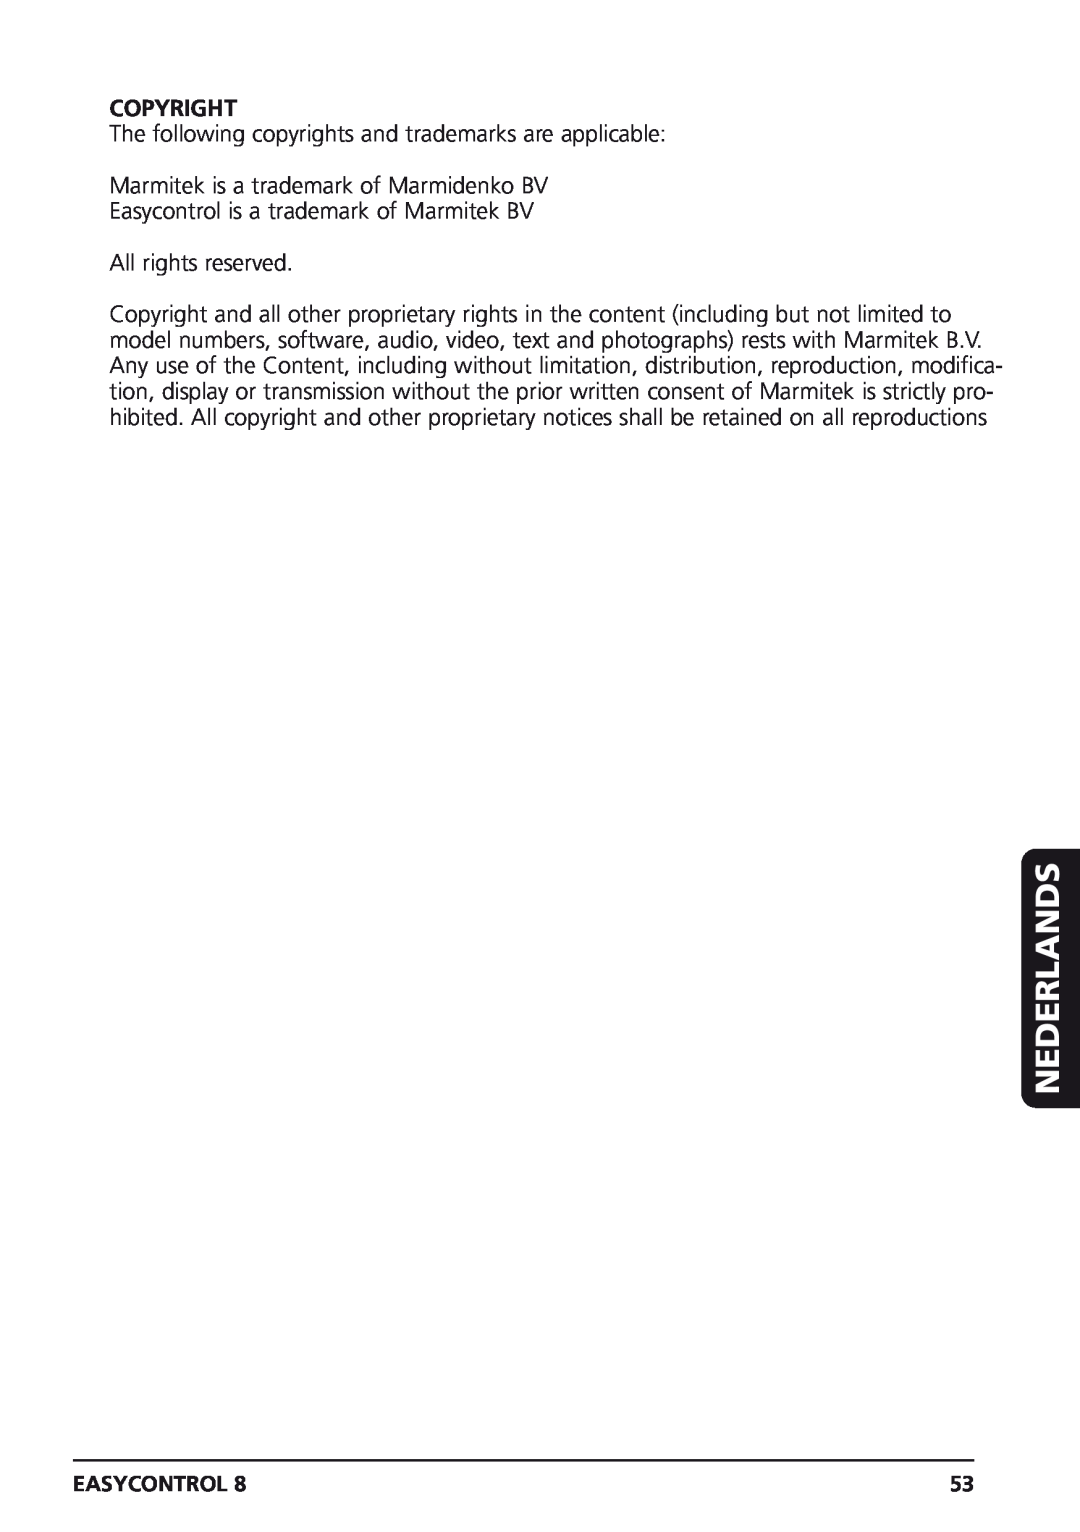 Marmitek Easycontrol 8 owner manual Copyright, Nederlands, The following copyrights and trademarks are applicable 